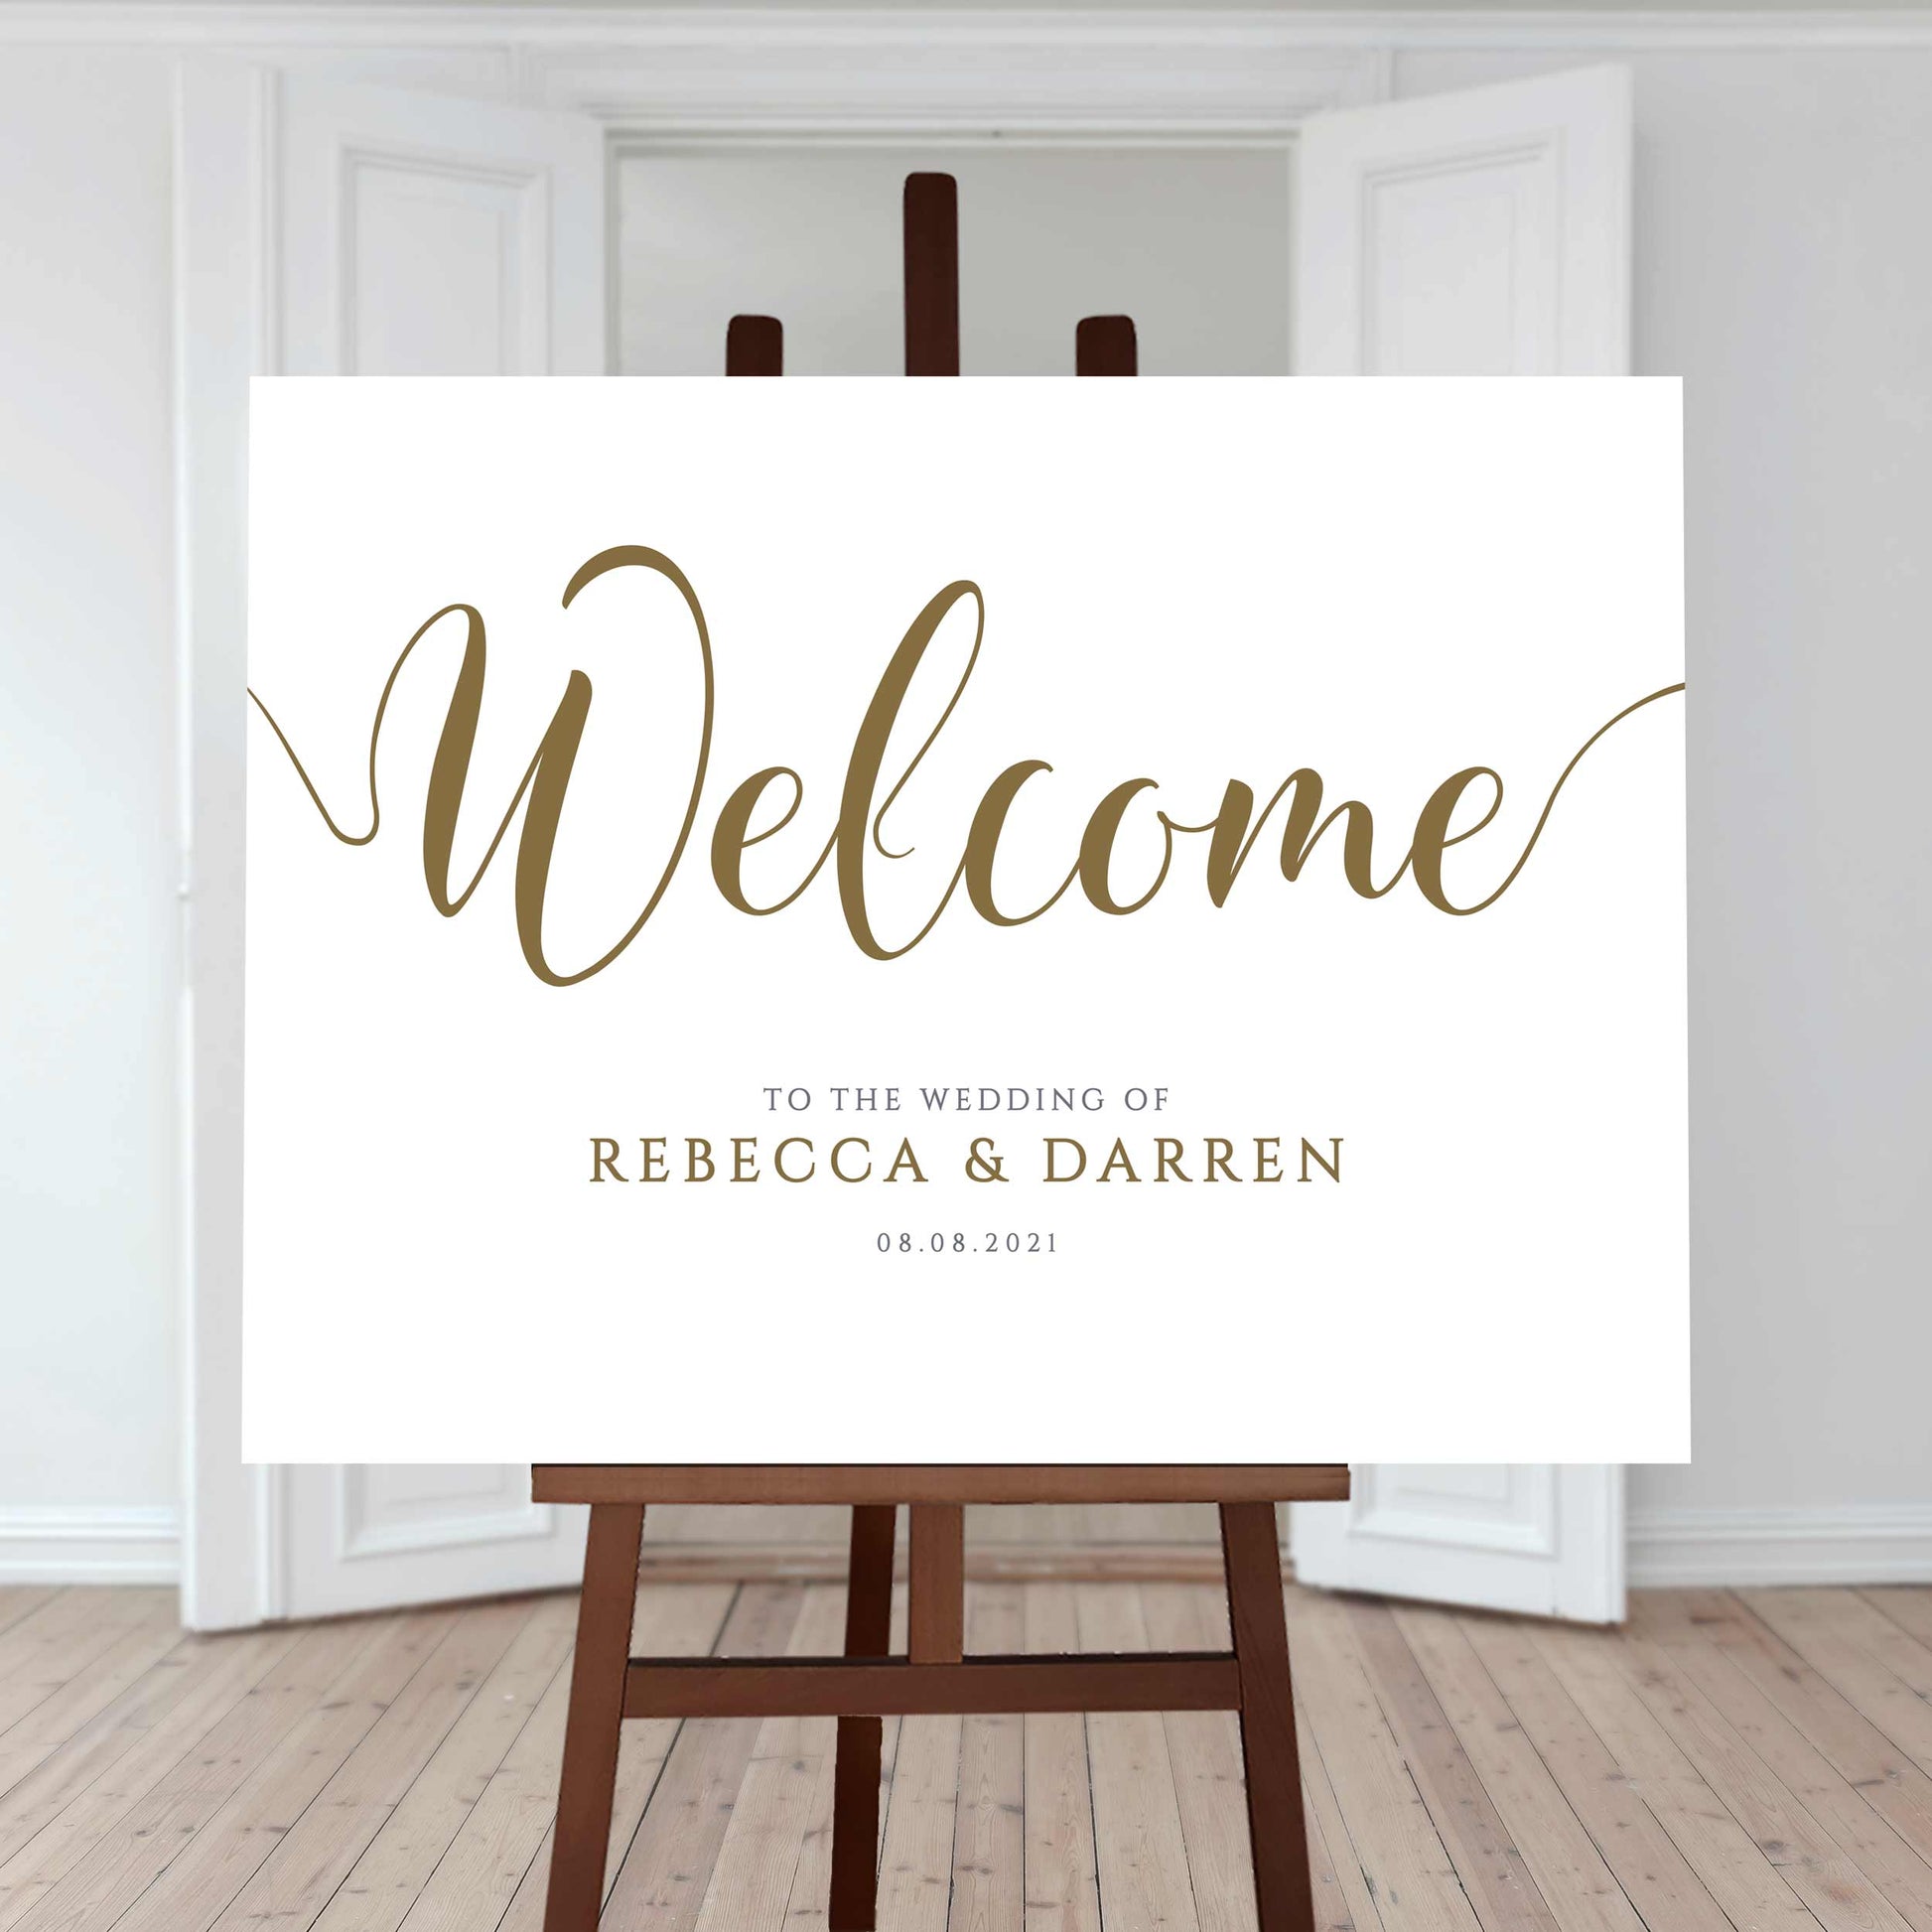 Gold wedding welcome sign printed on an easel